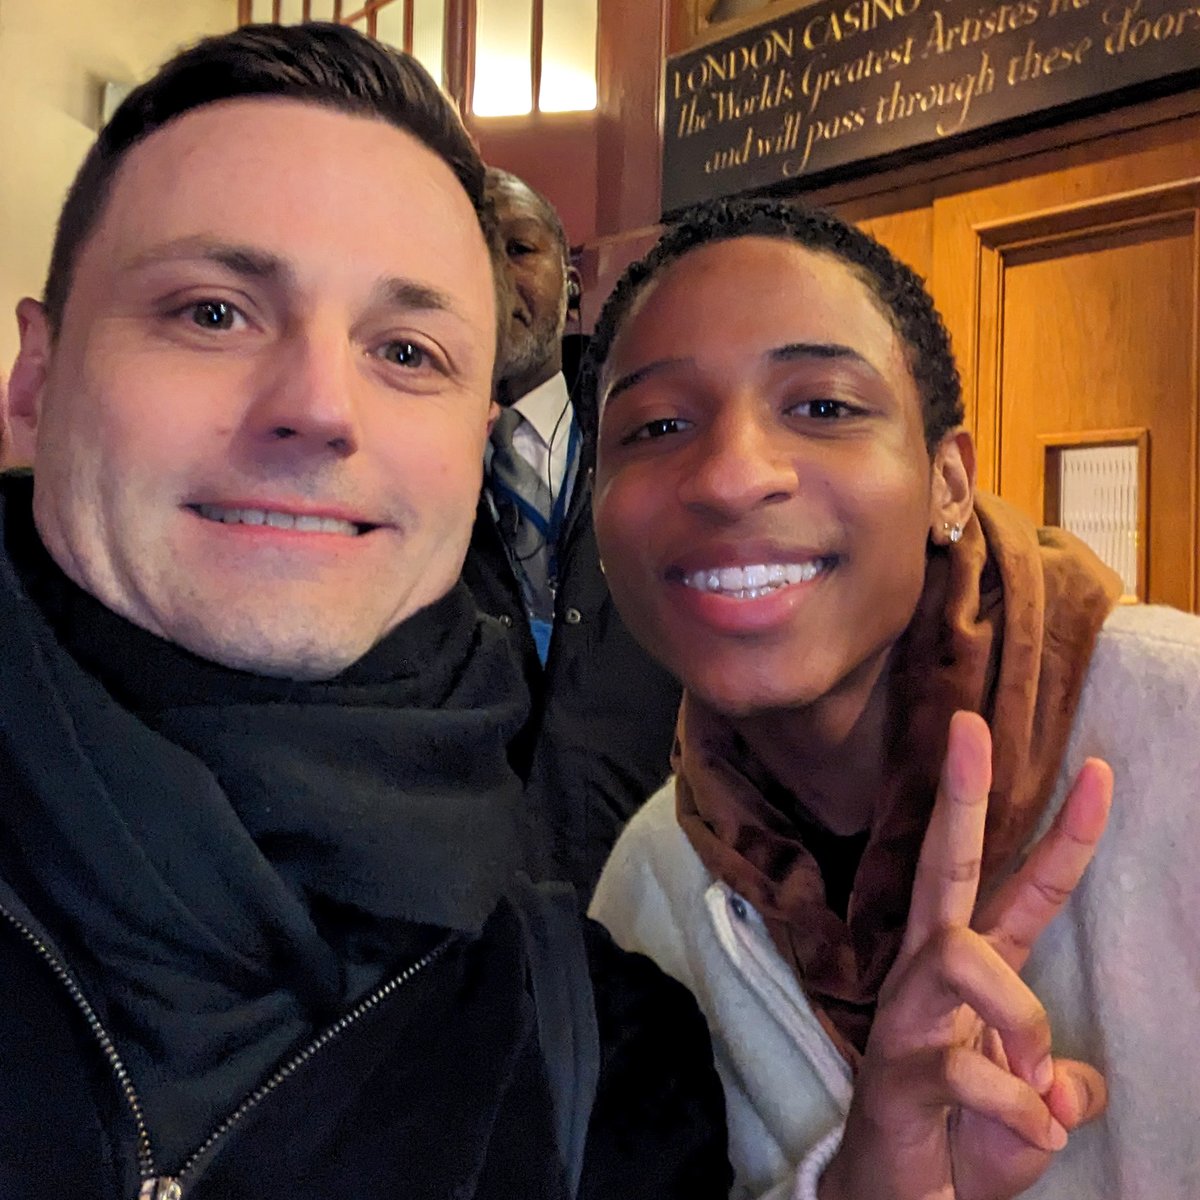 I met the  main actor of #MJtheMusicalUK and Tony Award winner #MylesFrost at the stage door after the  show. He plays #MichaelJackson really great. He was so kind. Thanx for the selfie.

You can watch my full #MJTheMusical video here: 
youtu.be/EqHswmCtAwc?si…